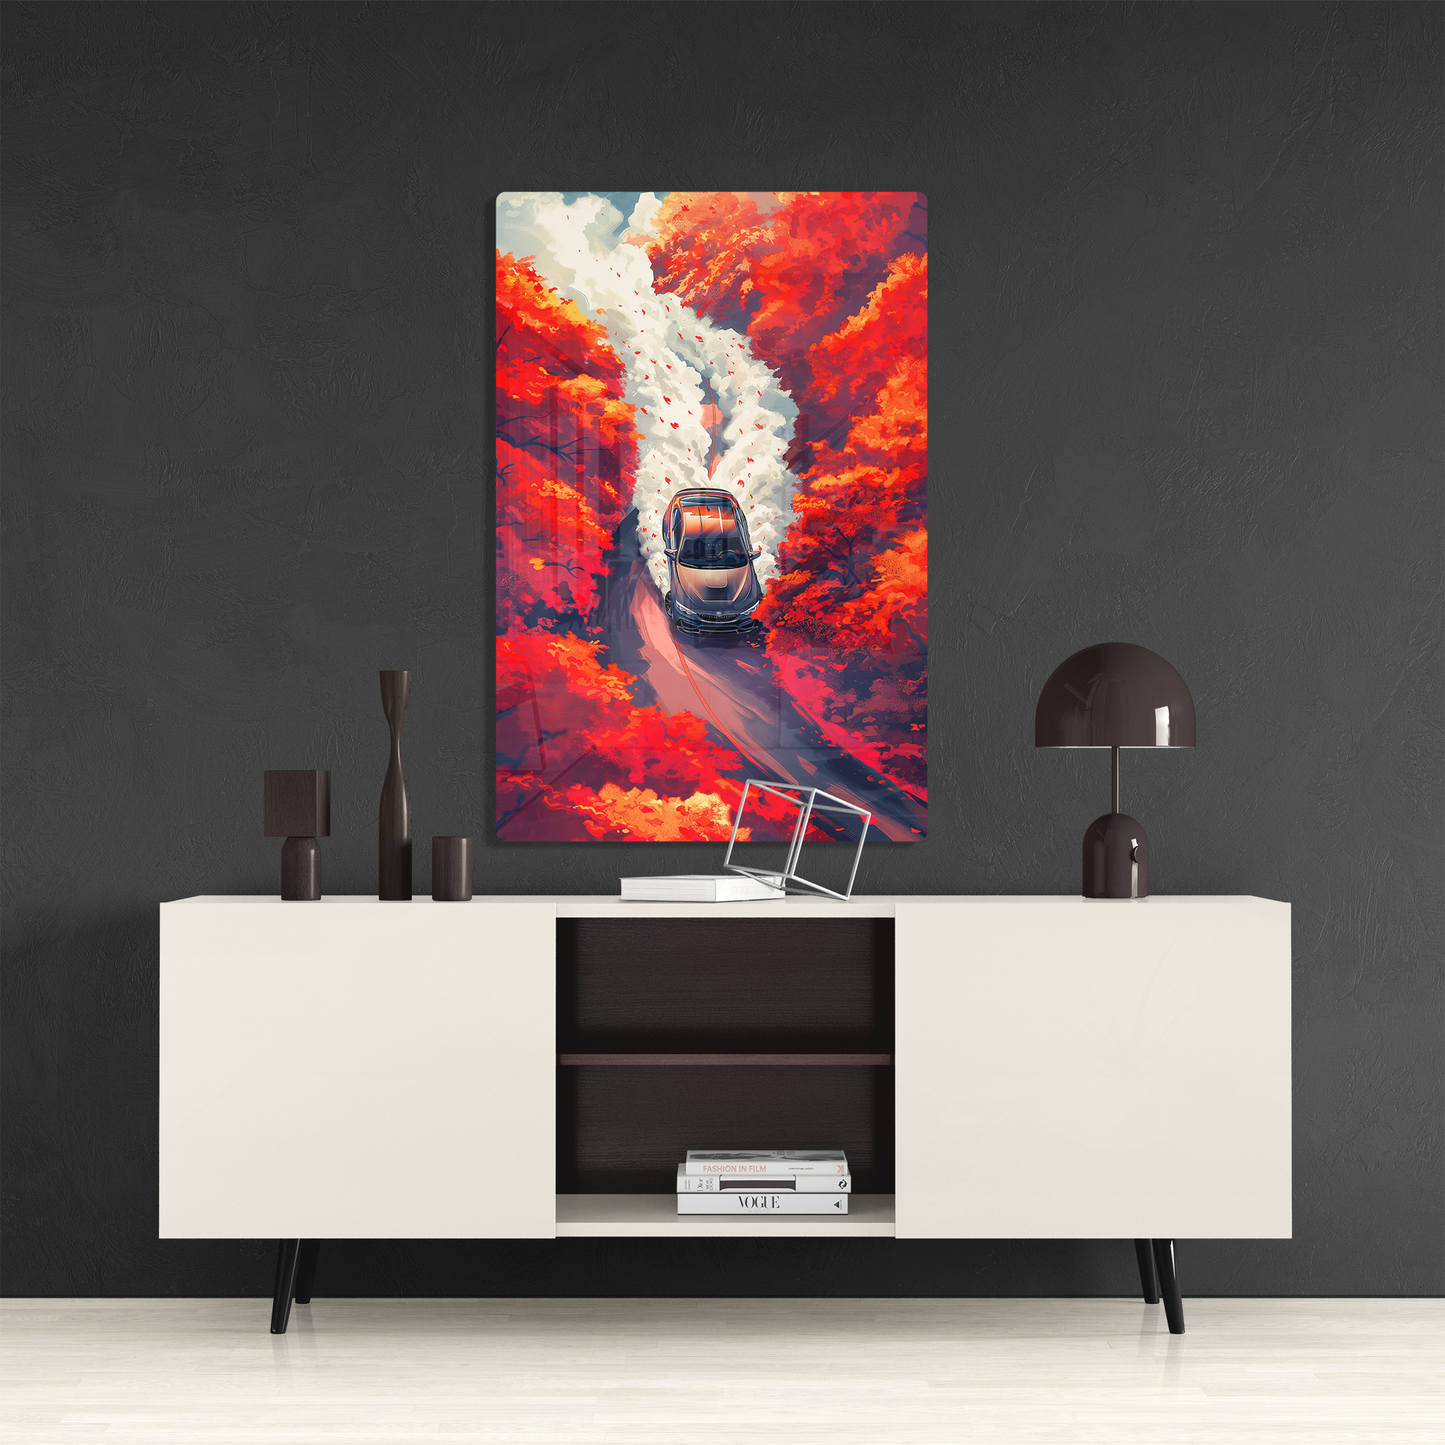 Autumn Drive (Acrylic)Step into the universe with an A drift car journey through a fiery autumnal forest. Acrylic art from RimaGallery. Experience the cosmos in your home with vibrant, etRimaGallery